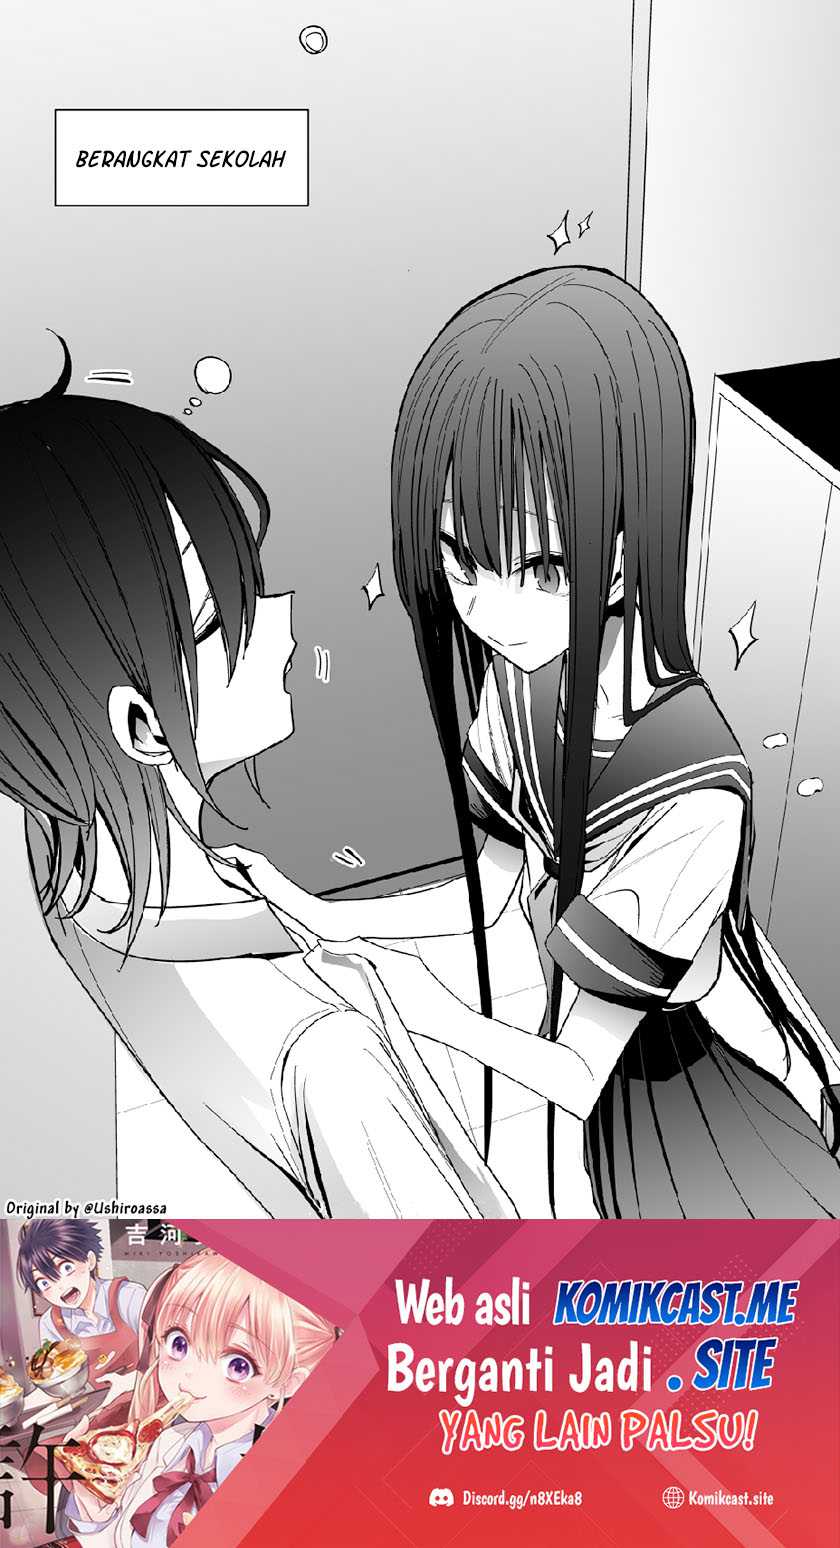 Mitsuishi-san is Being Weird This Year Chapter 22